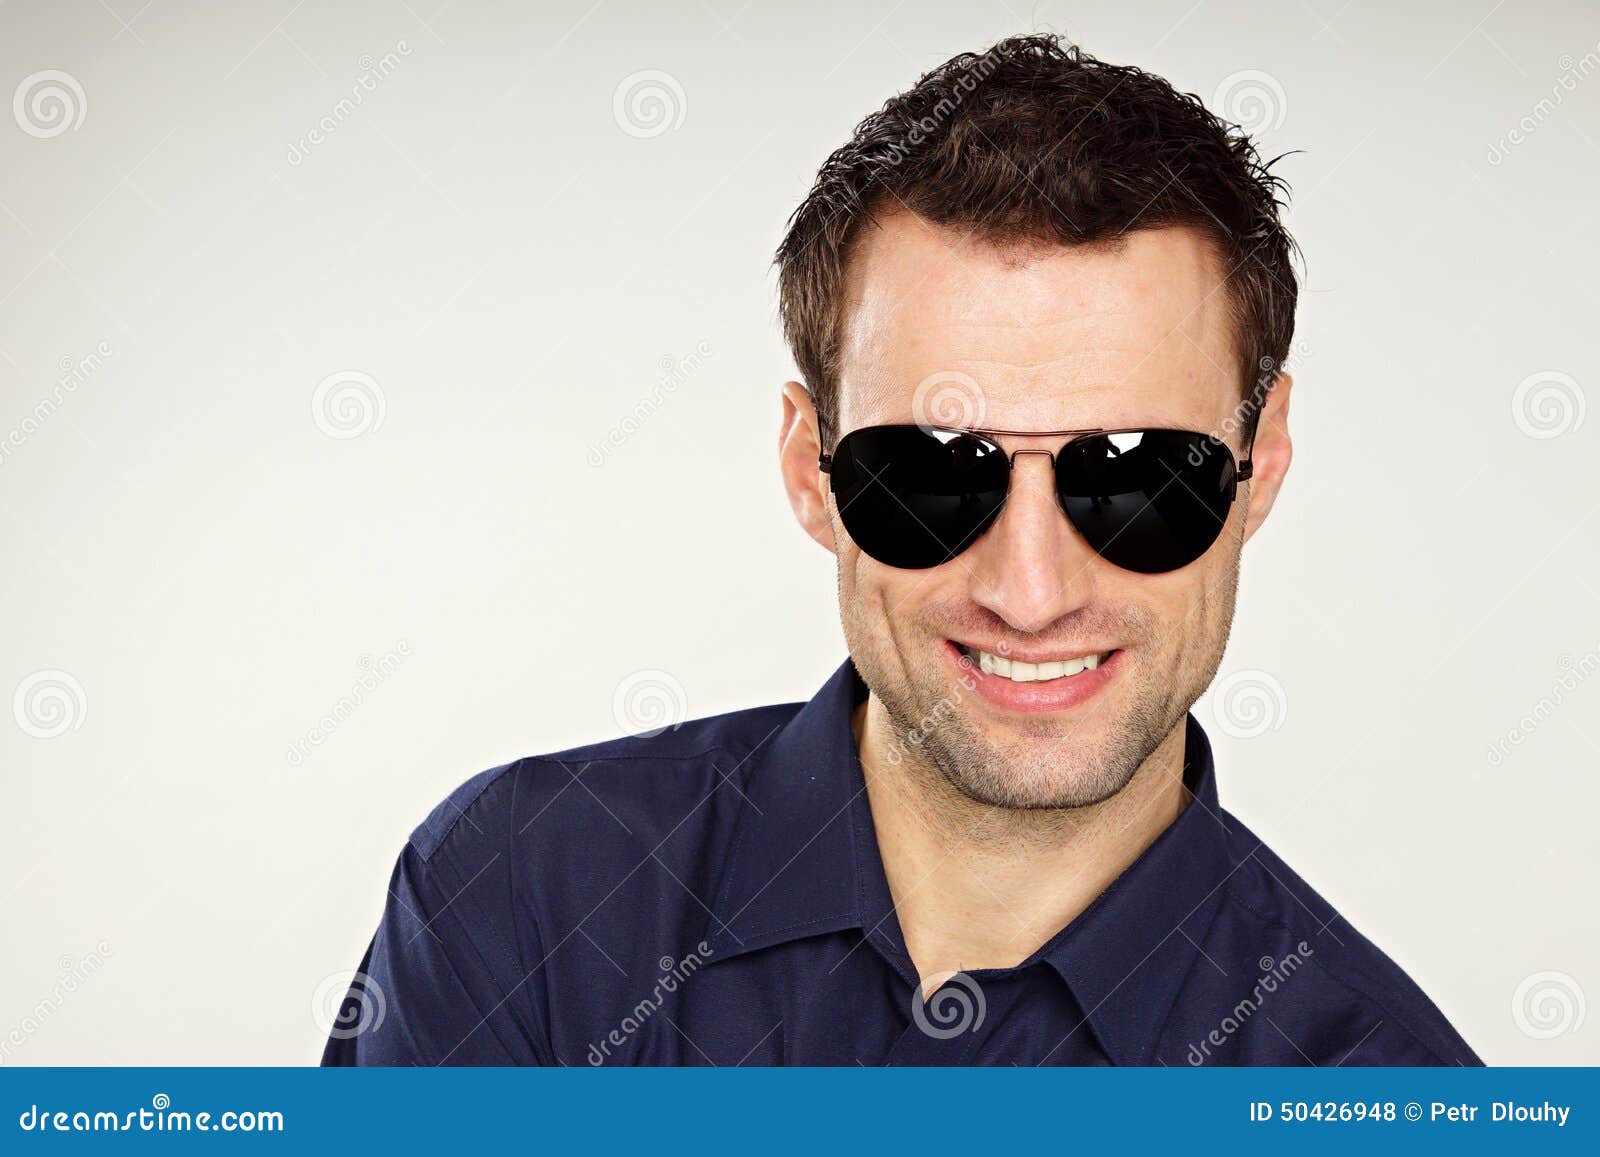 Young man with sunglasses stock photo. Image of attractive - 50426948